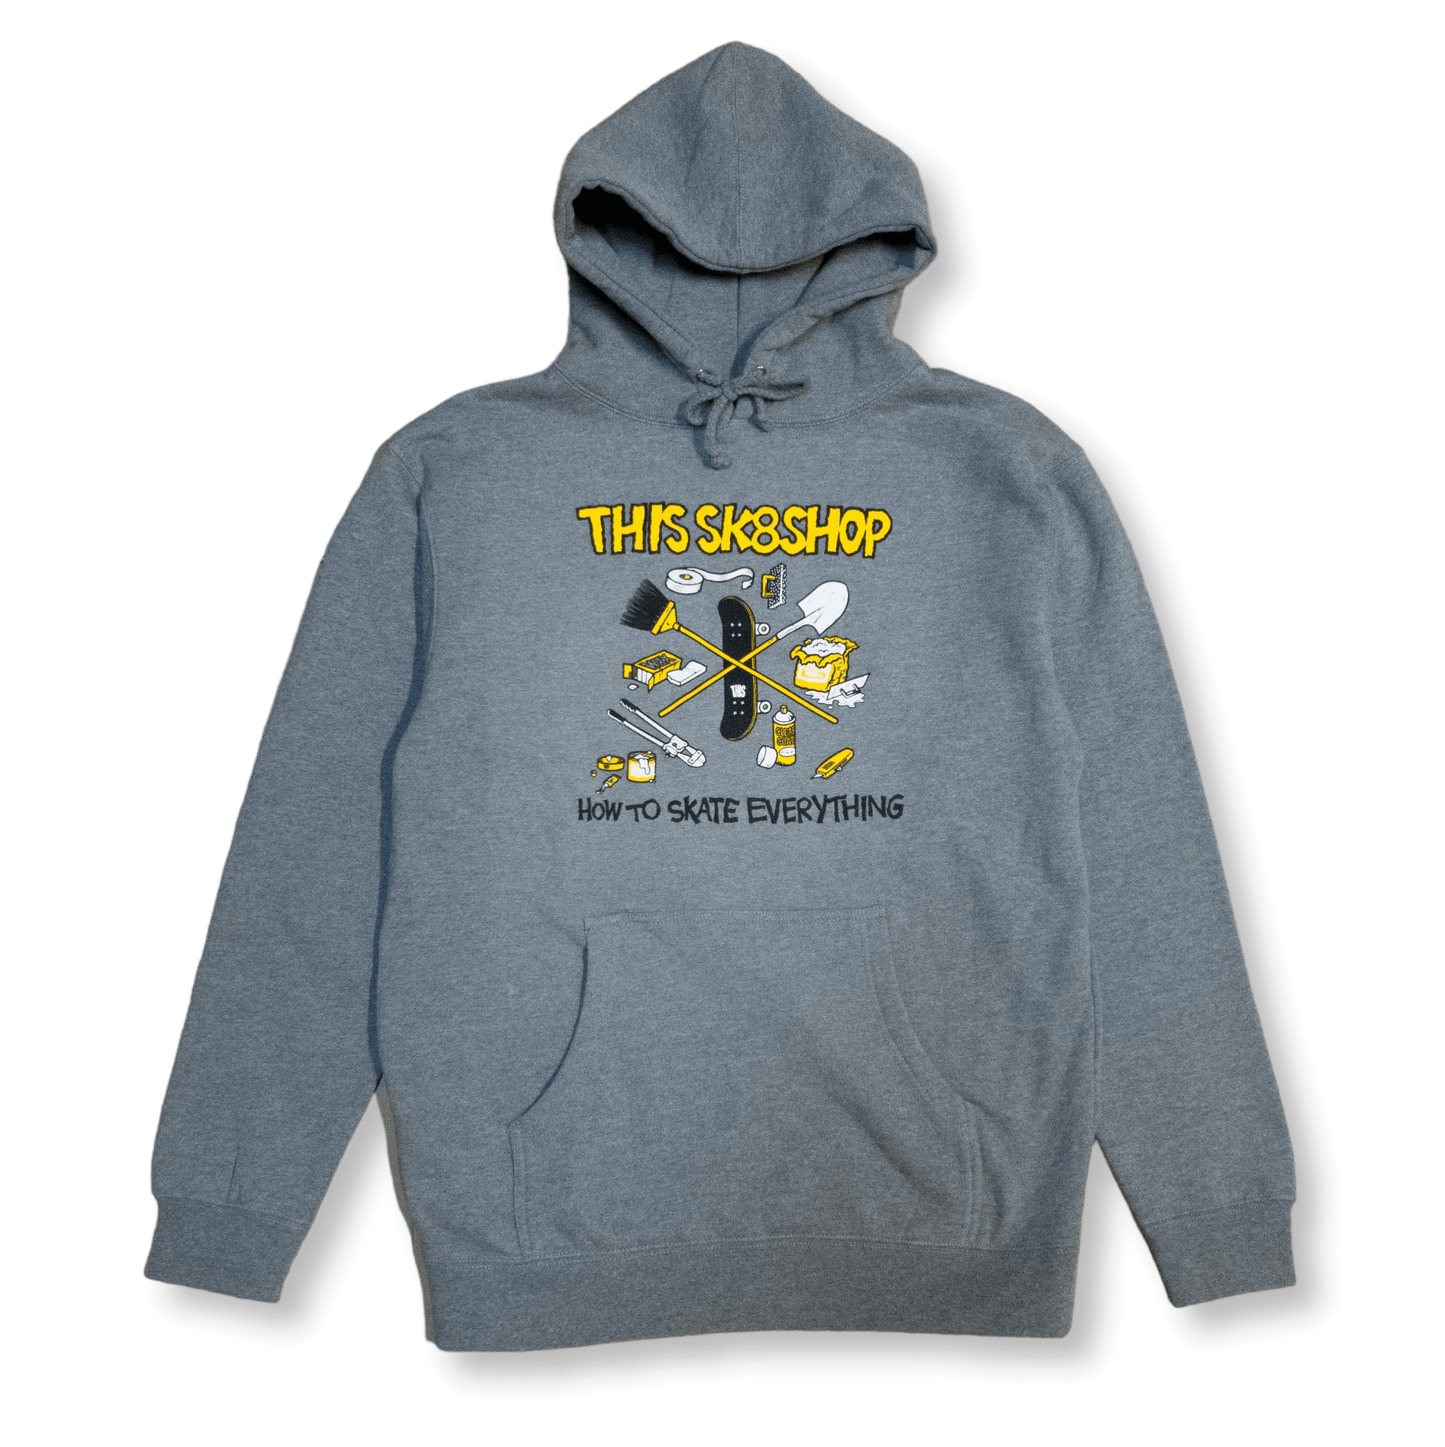 THIS Skateshop | How to Skate Everything Hoodie - Gunmetal Heather (Graphic By Todd Bratrud)